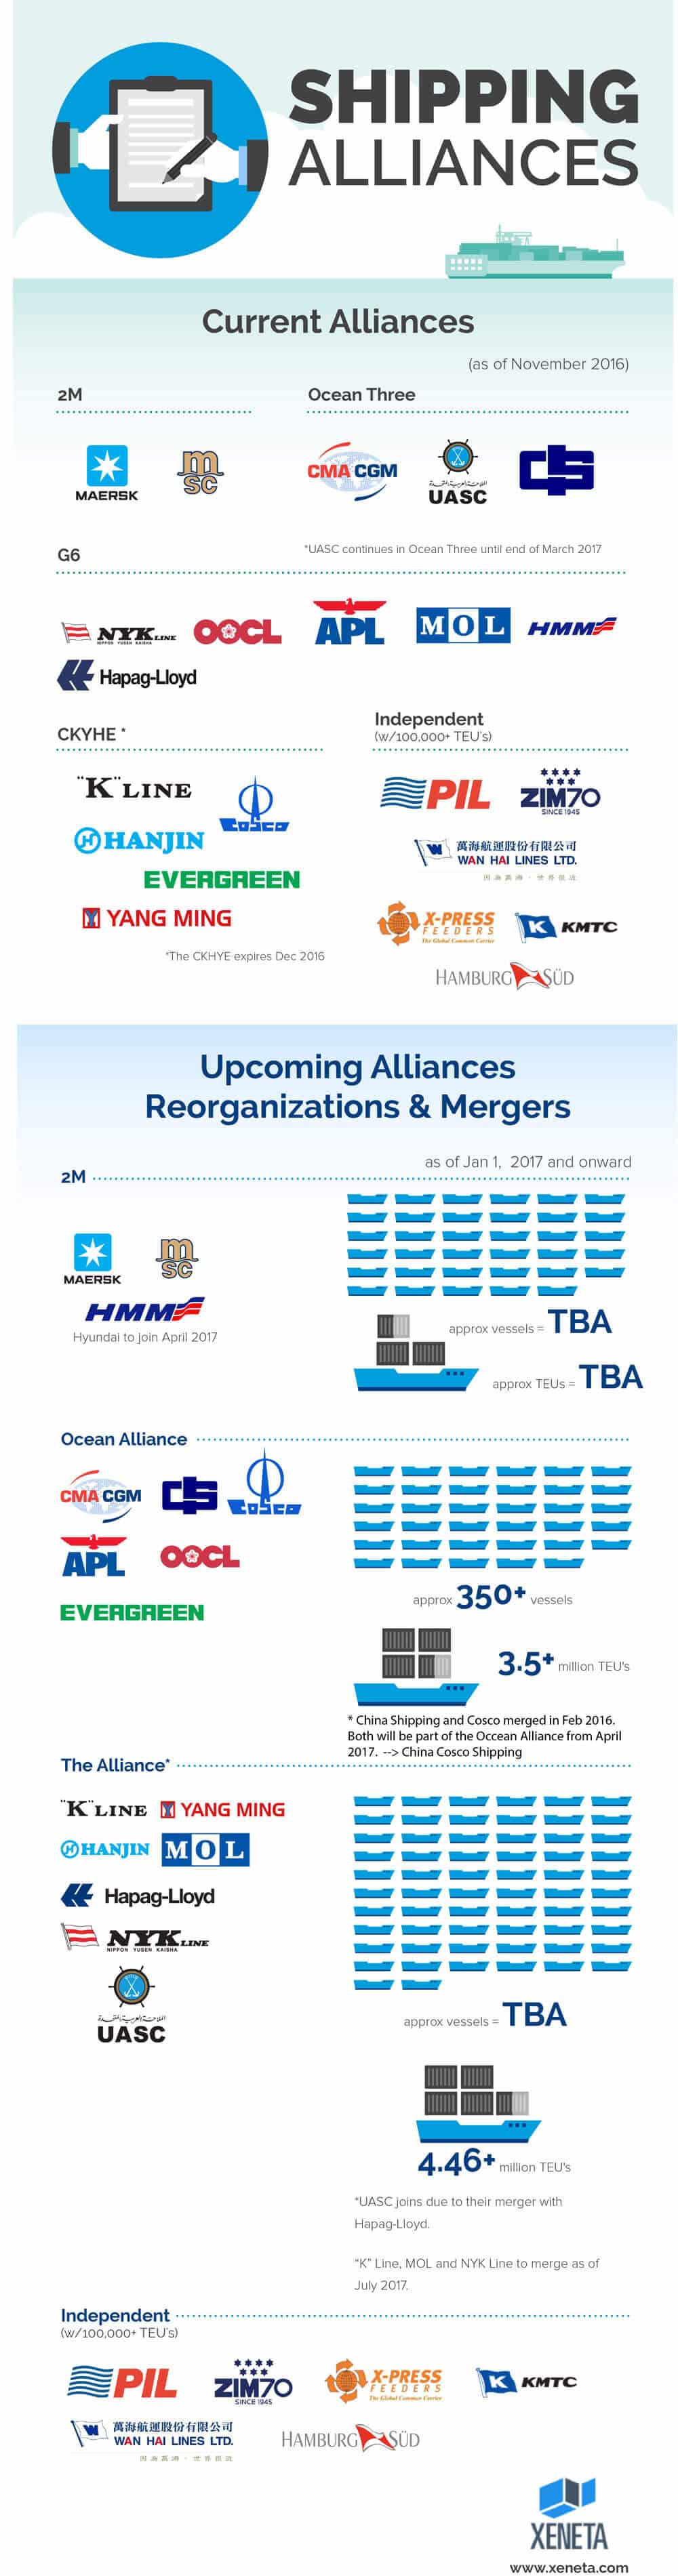 Shipping Alliances & Mergers